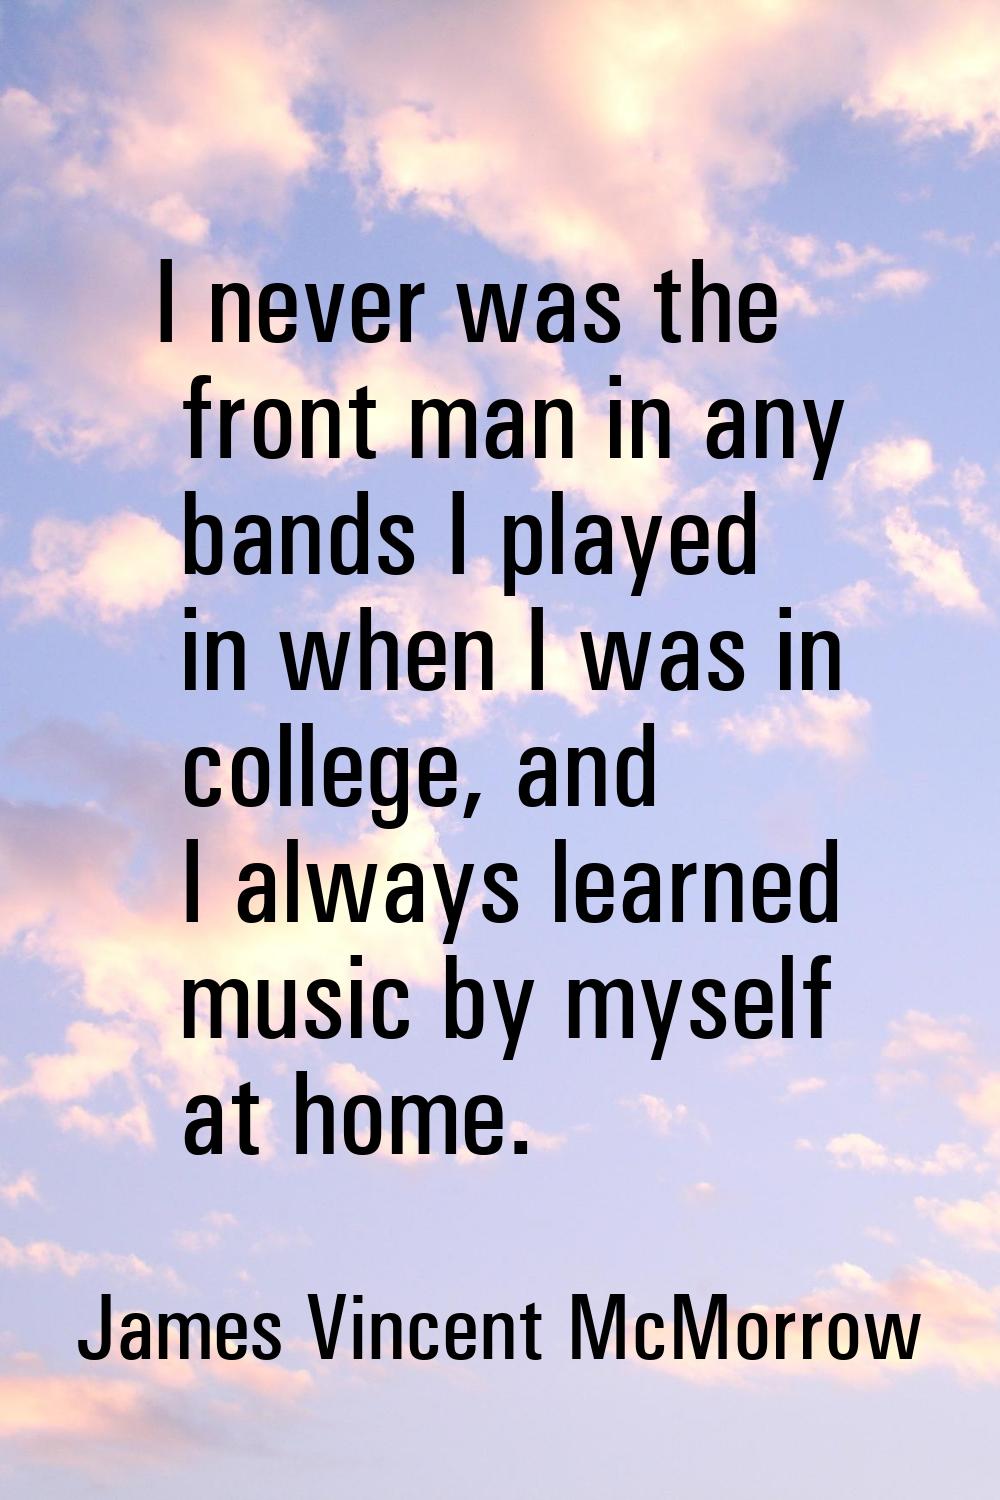 I never was the front man in any bands I played in when I was in college, and I always learned musi